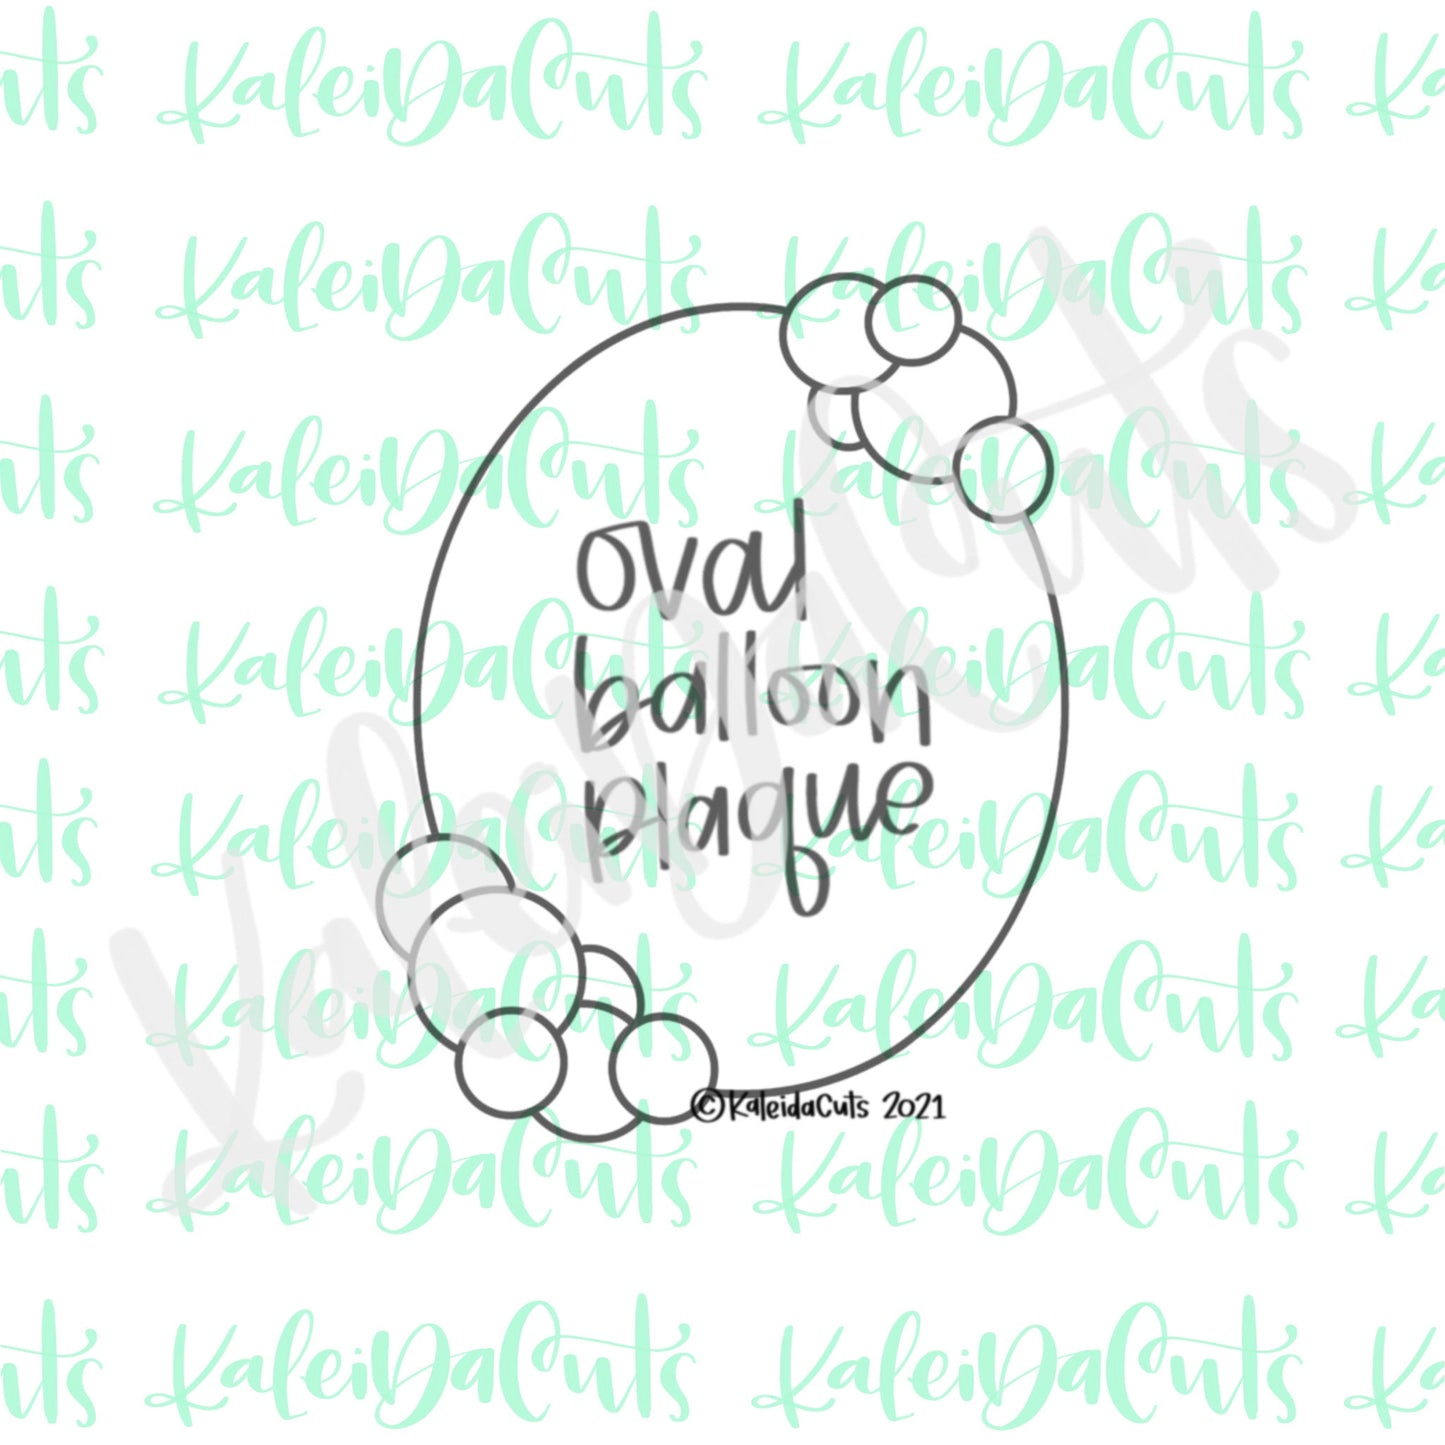 Oval Balloon Plaque Cookie Cutter